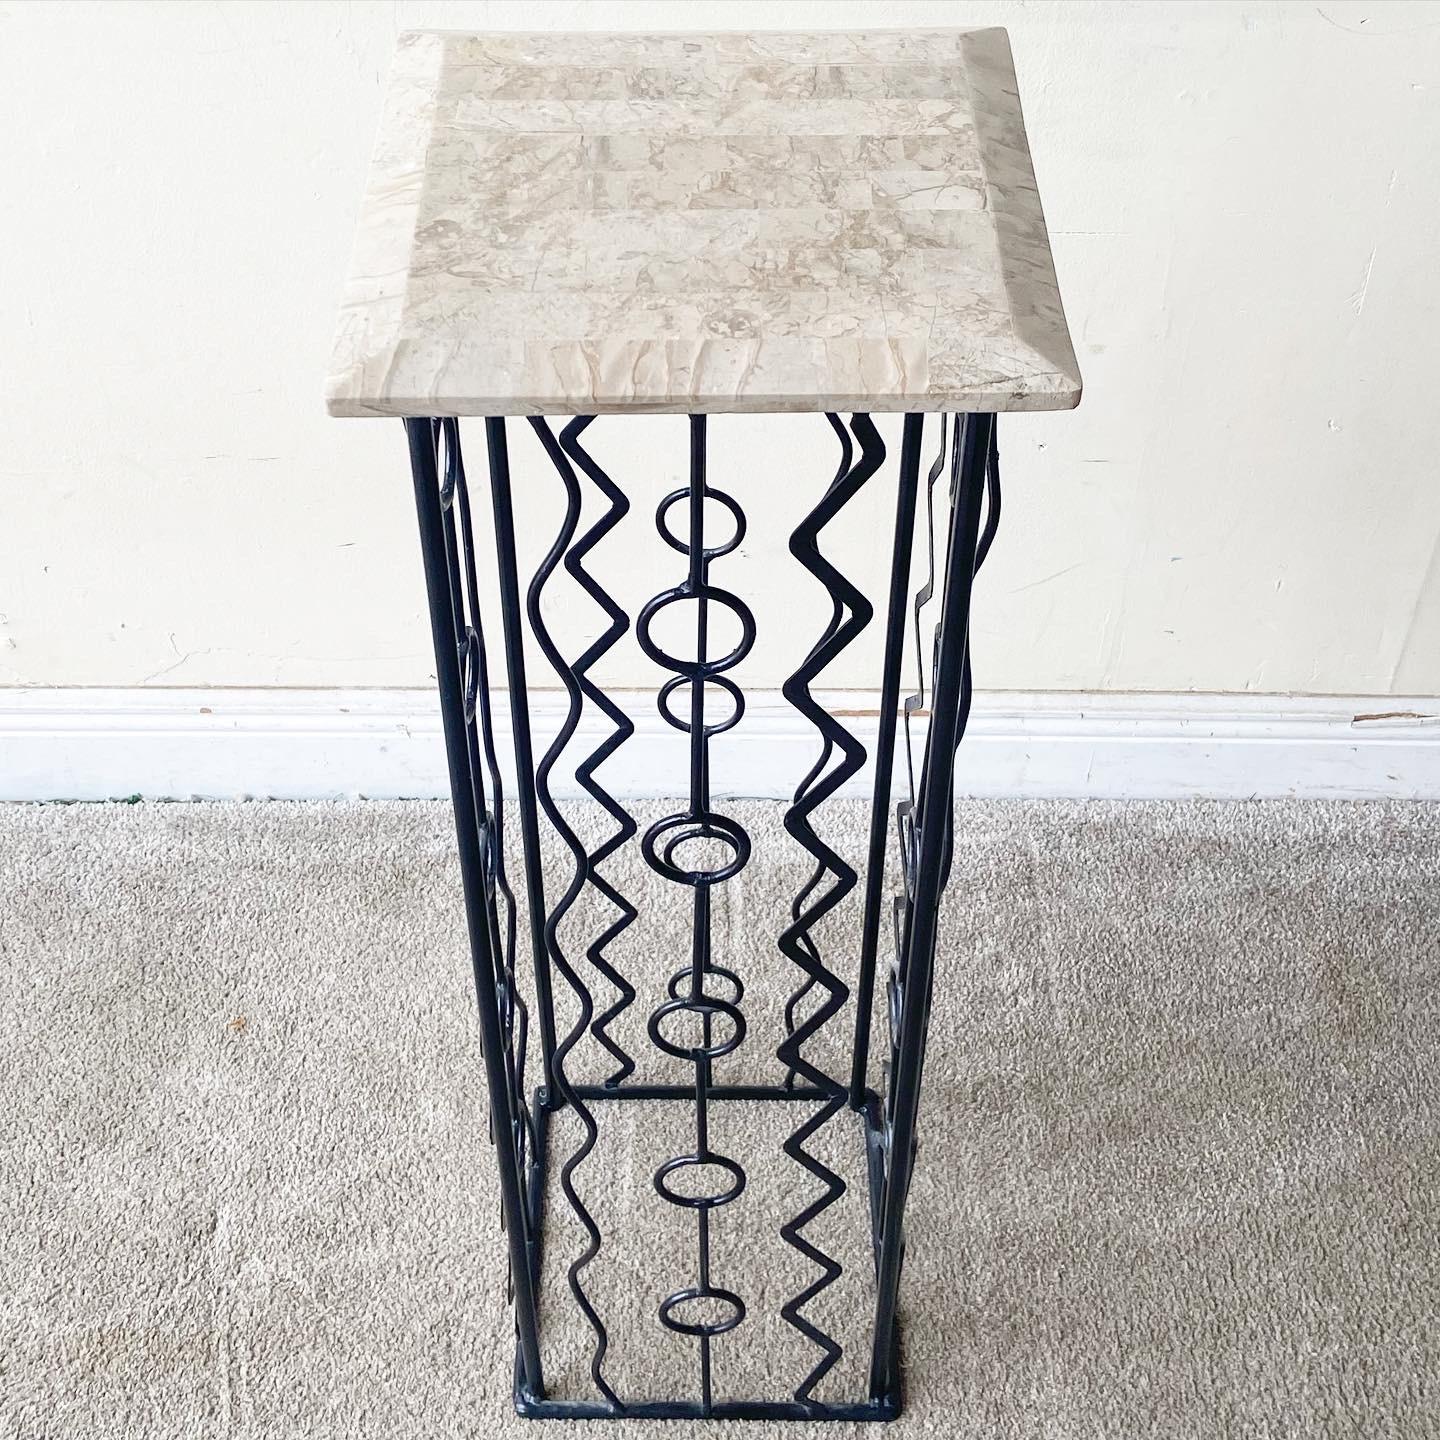 Amazing postmodern iron pedestal. The top is comprised of a polished tessellated stone.